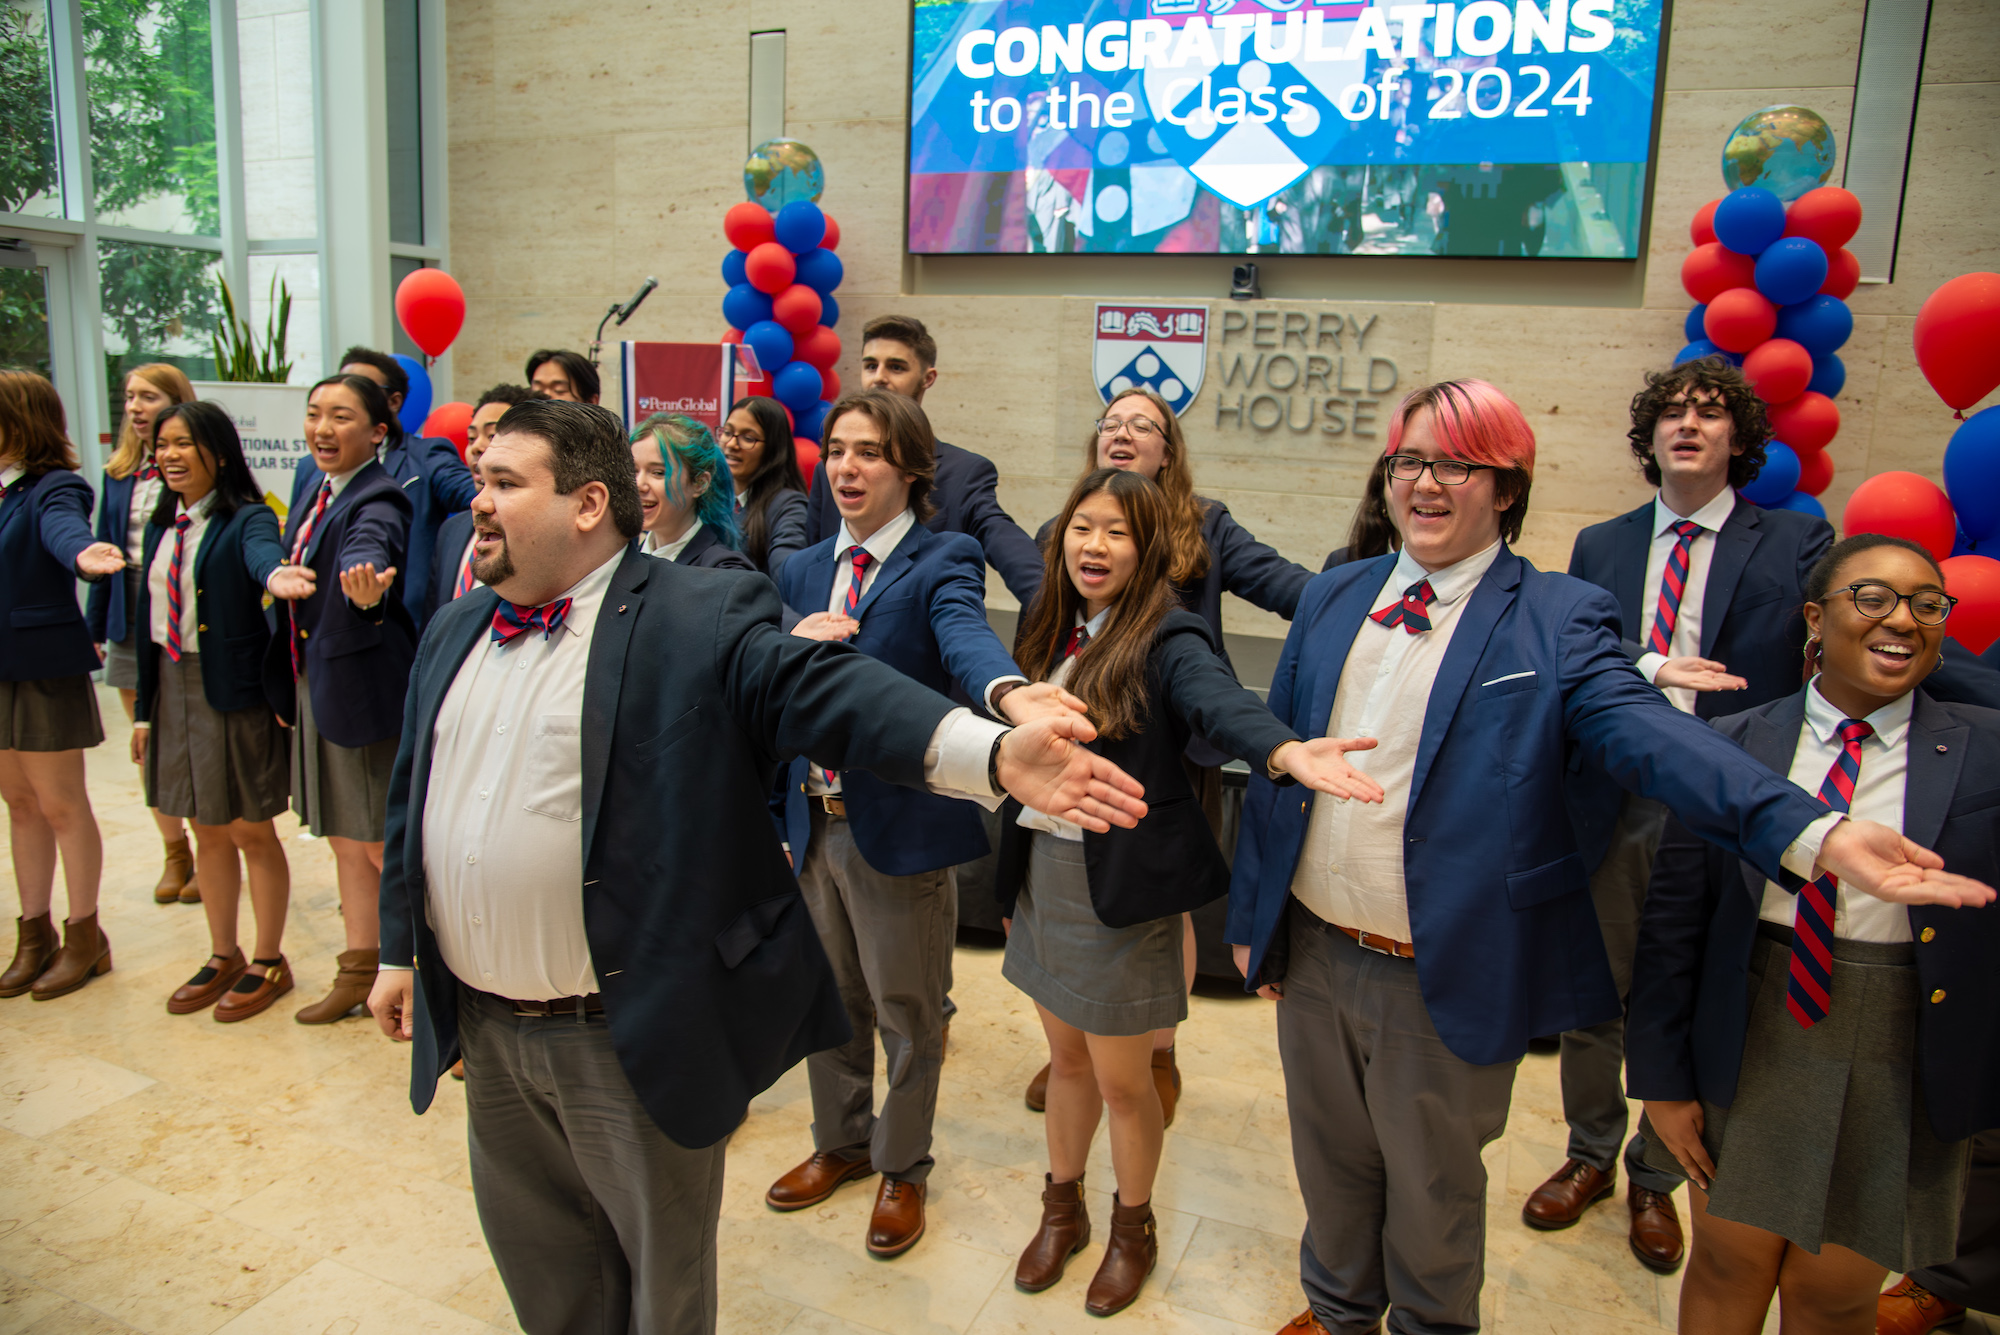 Penn Glee club performs at Perry World House, with towers of red and blue balloons behind them.